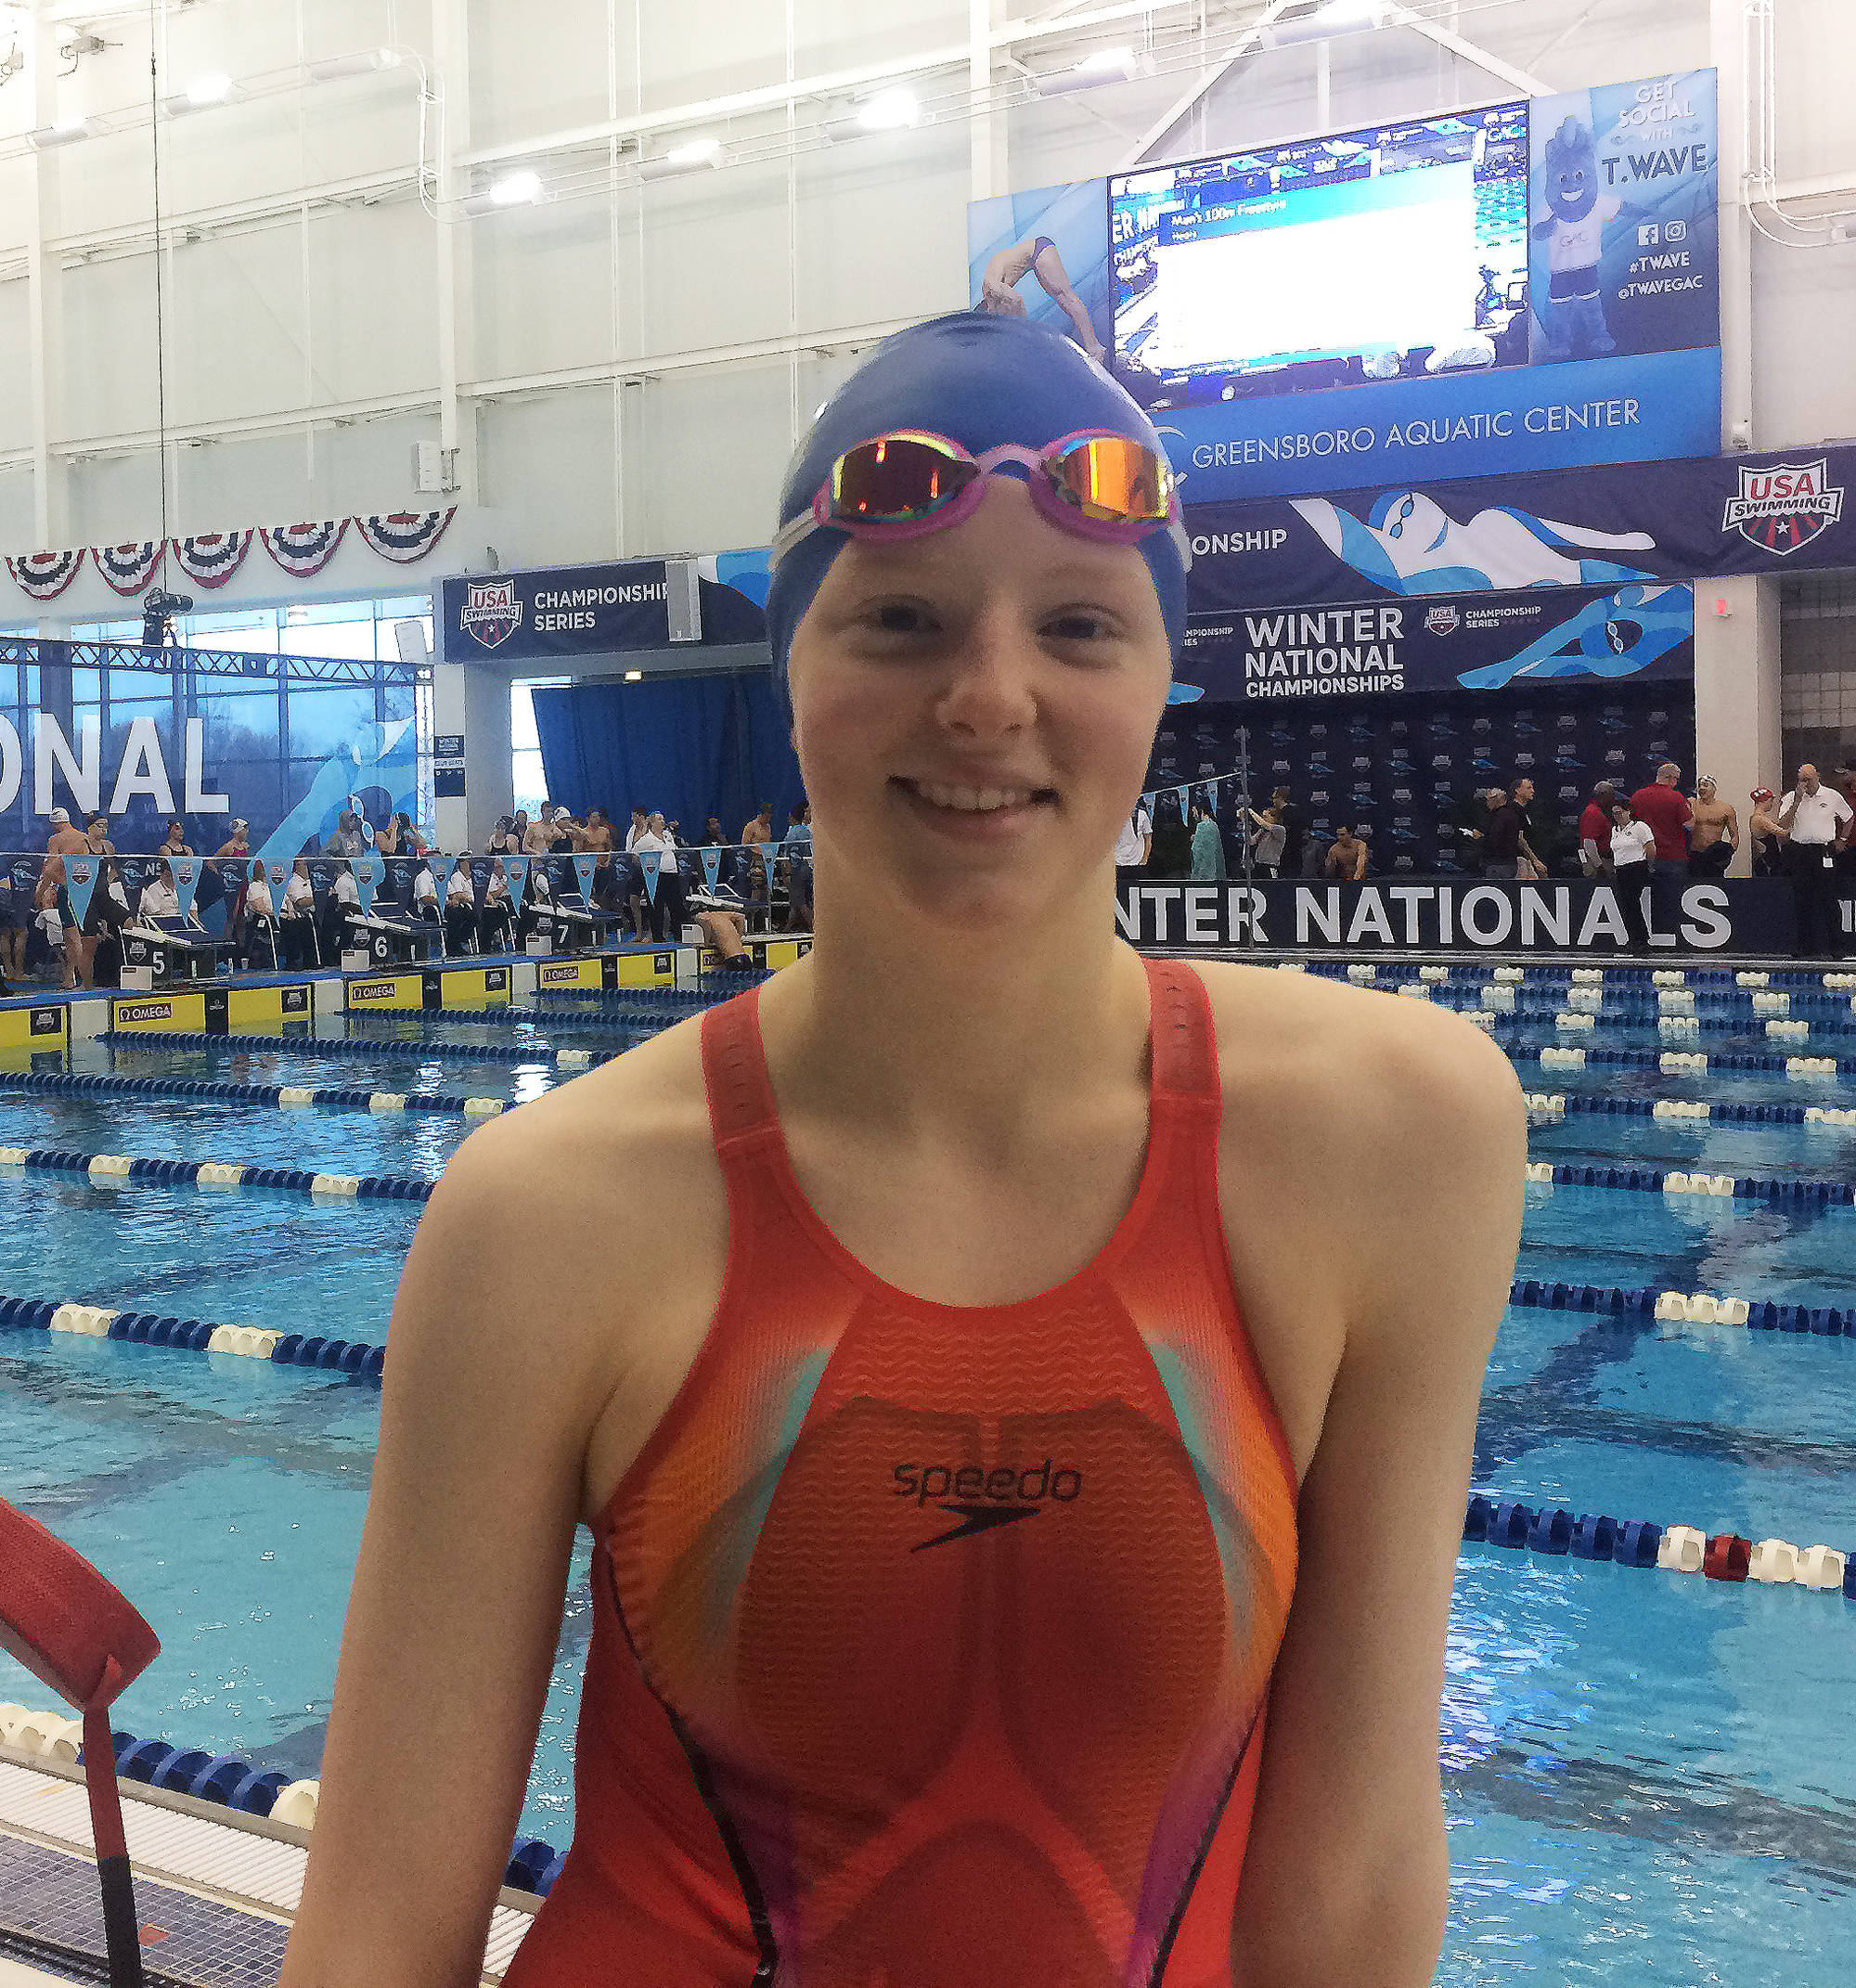 Seward swimmer Lydia Jacoby poses before an event at the USA Swimming Winter National Championship meet in Greensboro, North Carolina. (Photo provided by Meghan O’Leary)